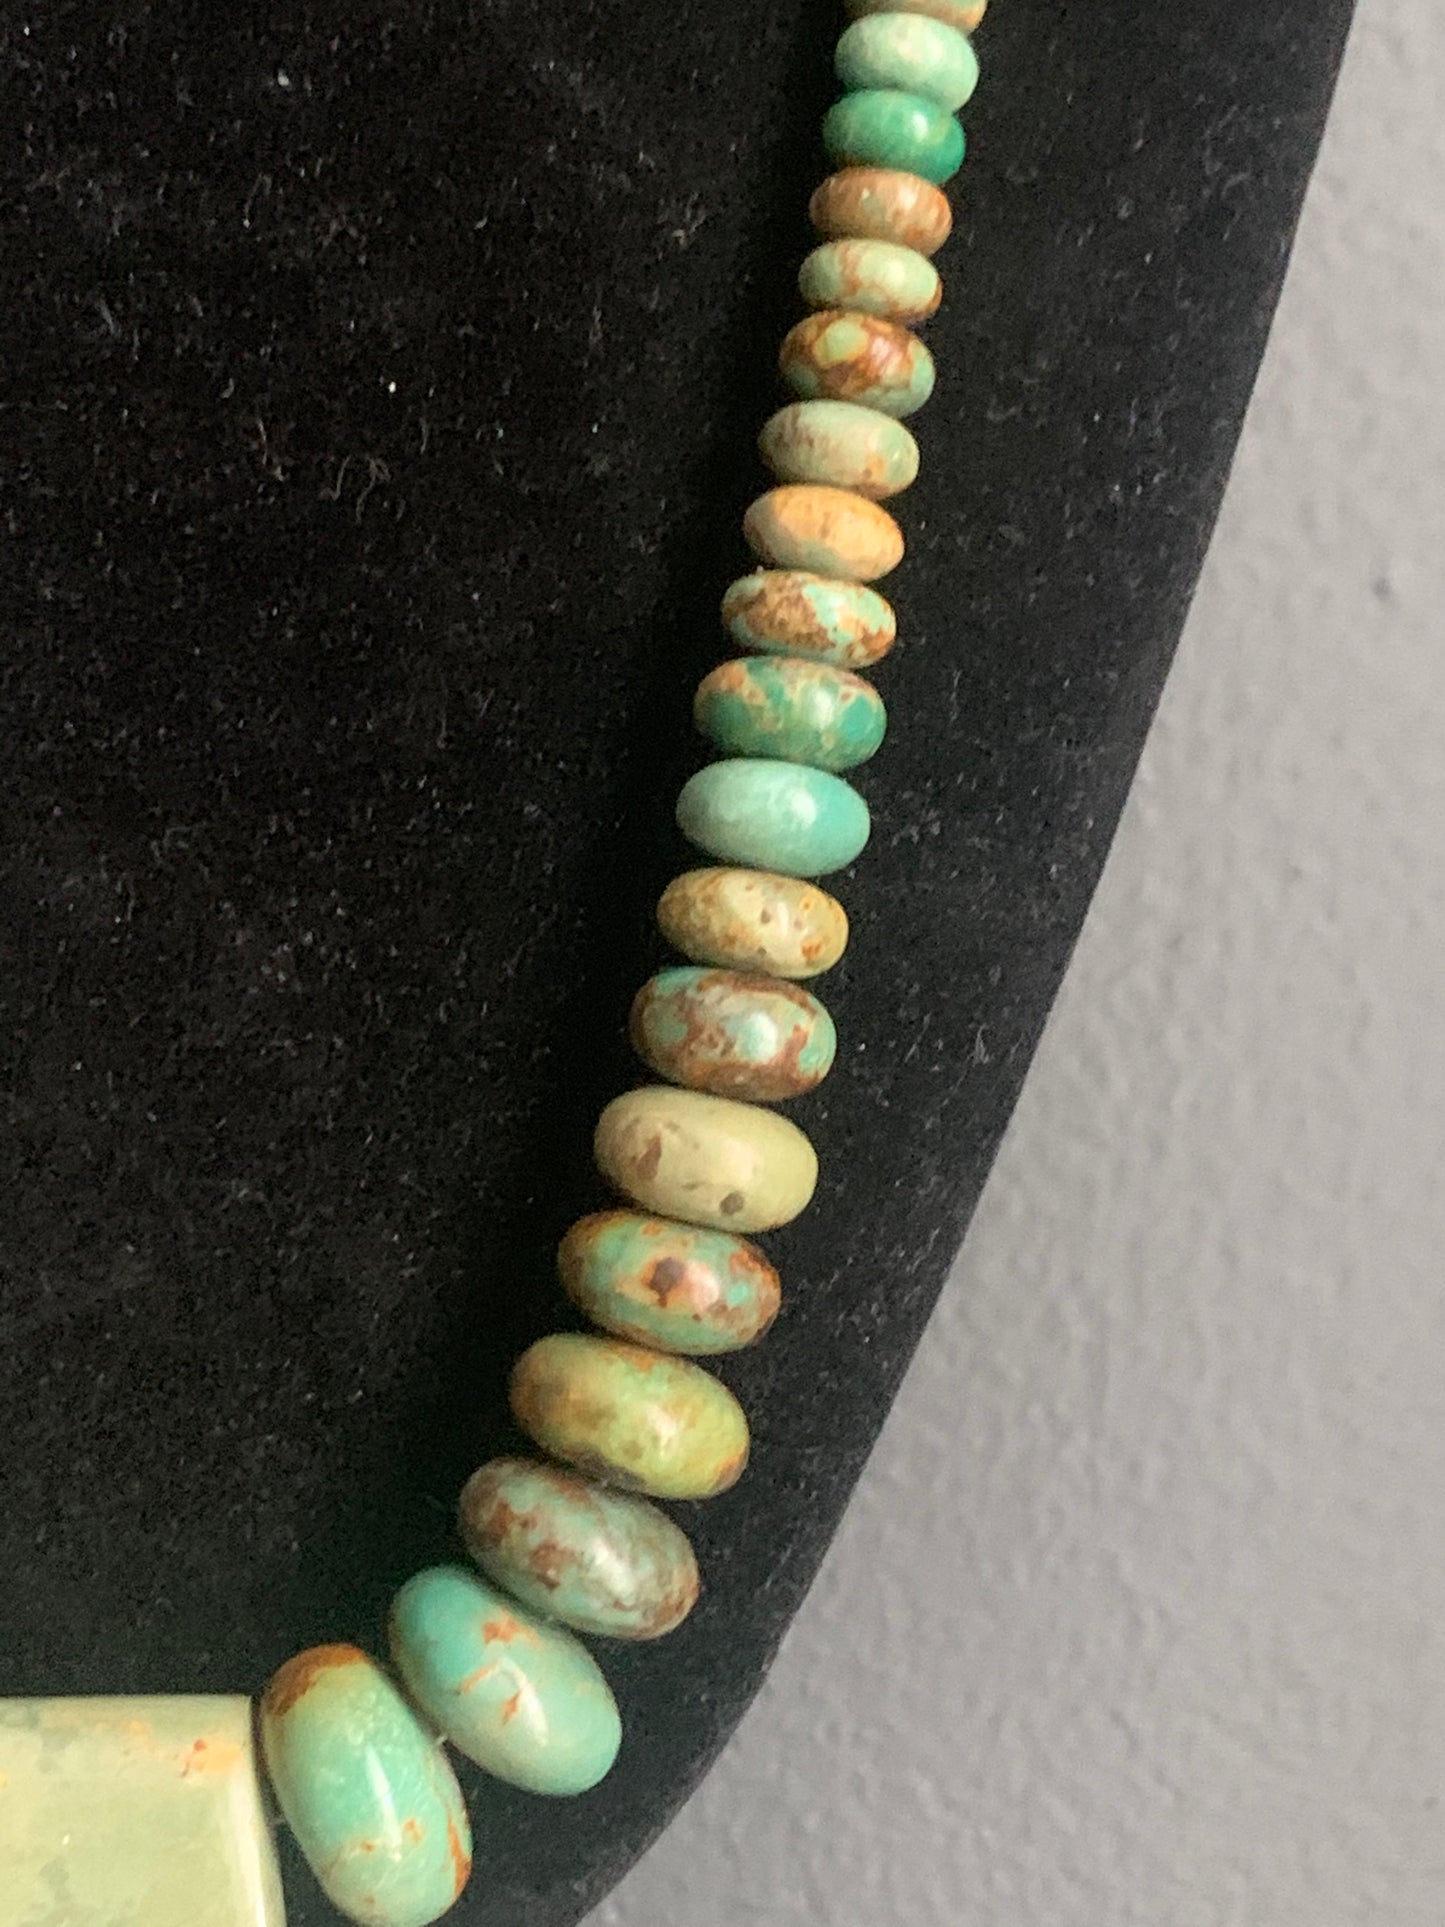 A turquoise necklace